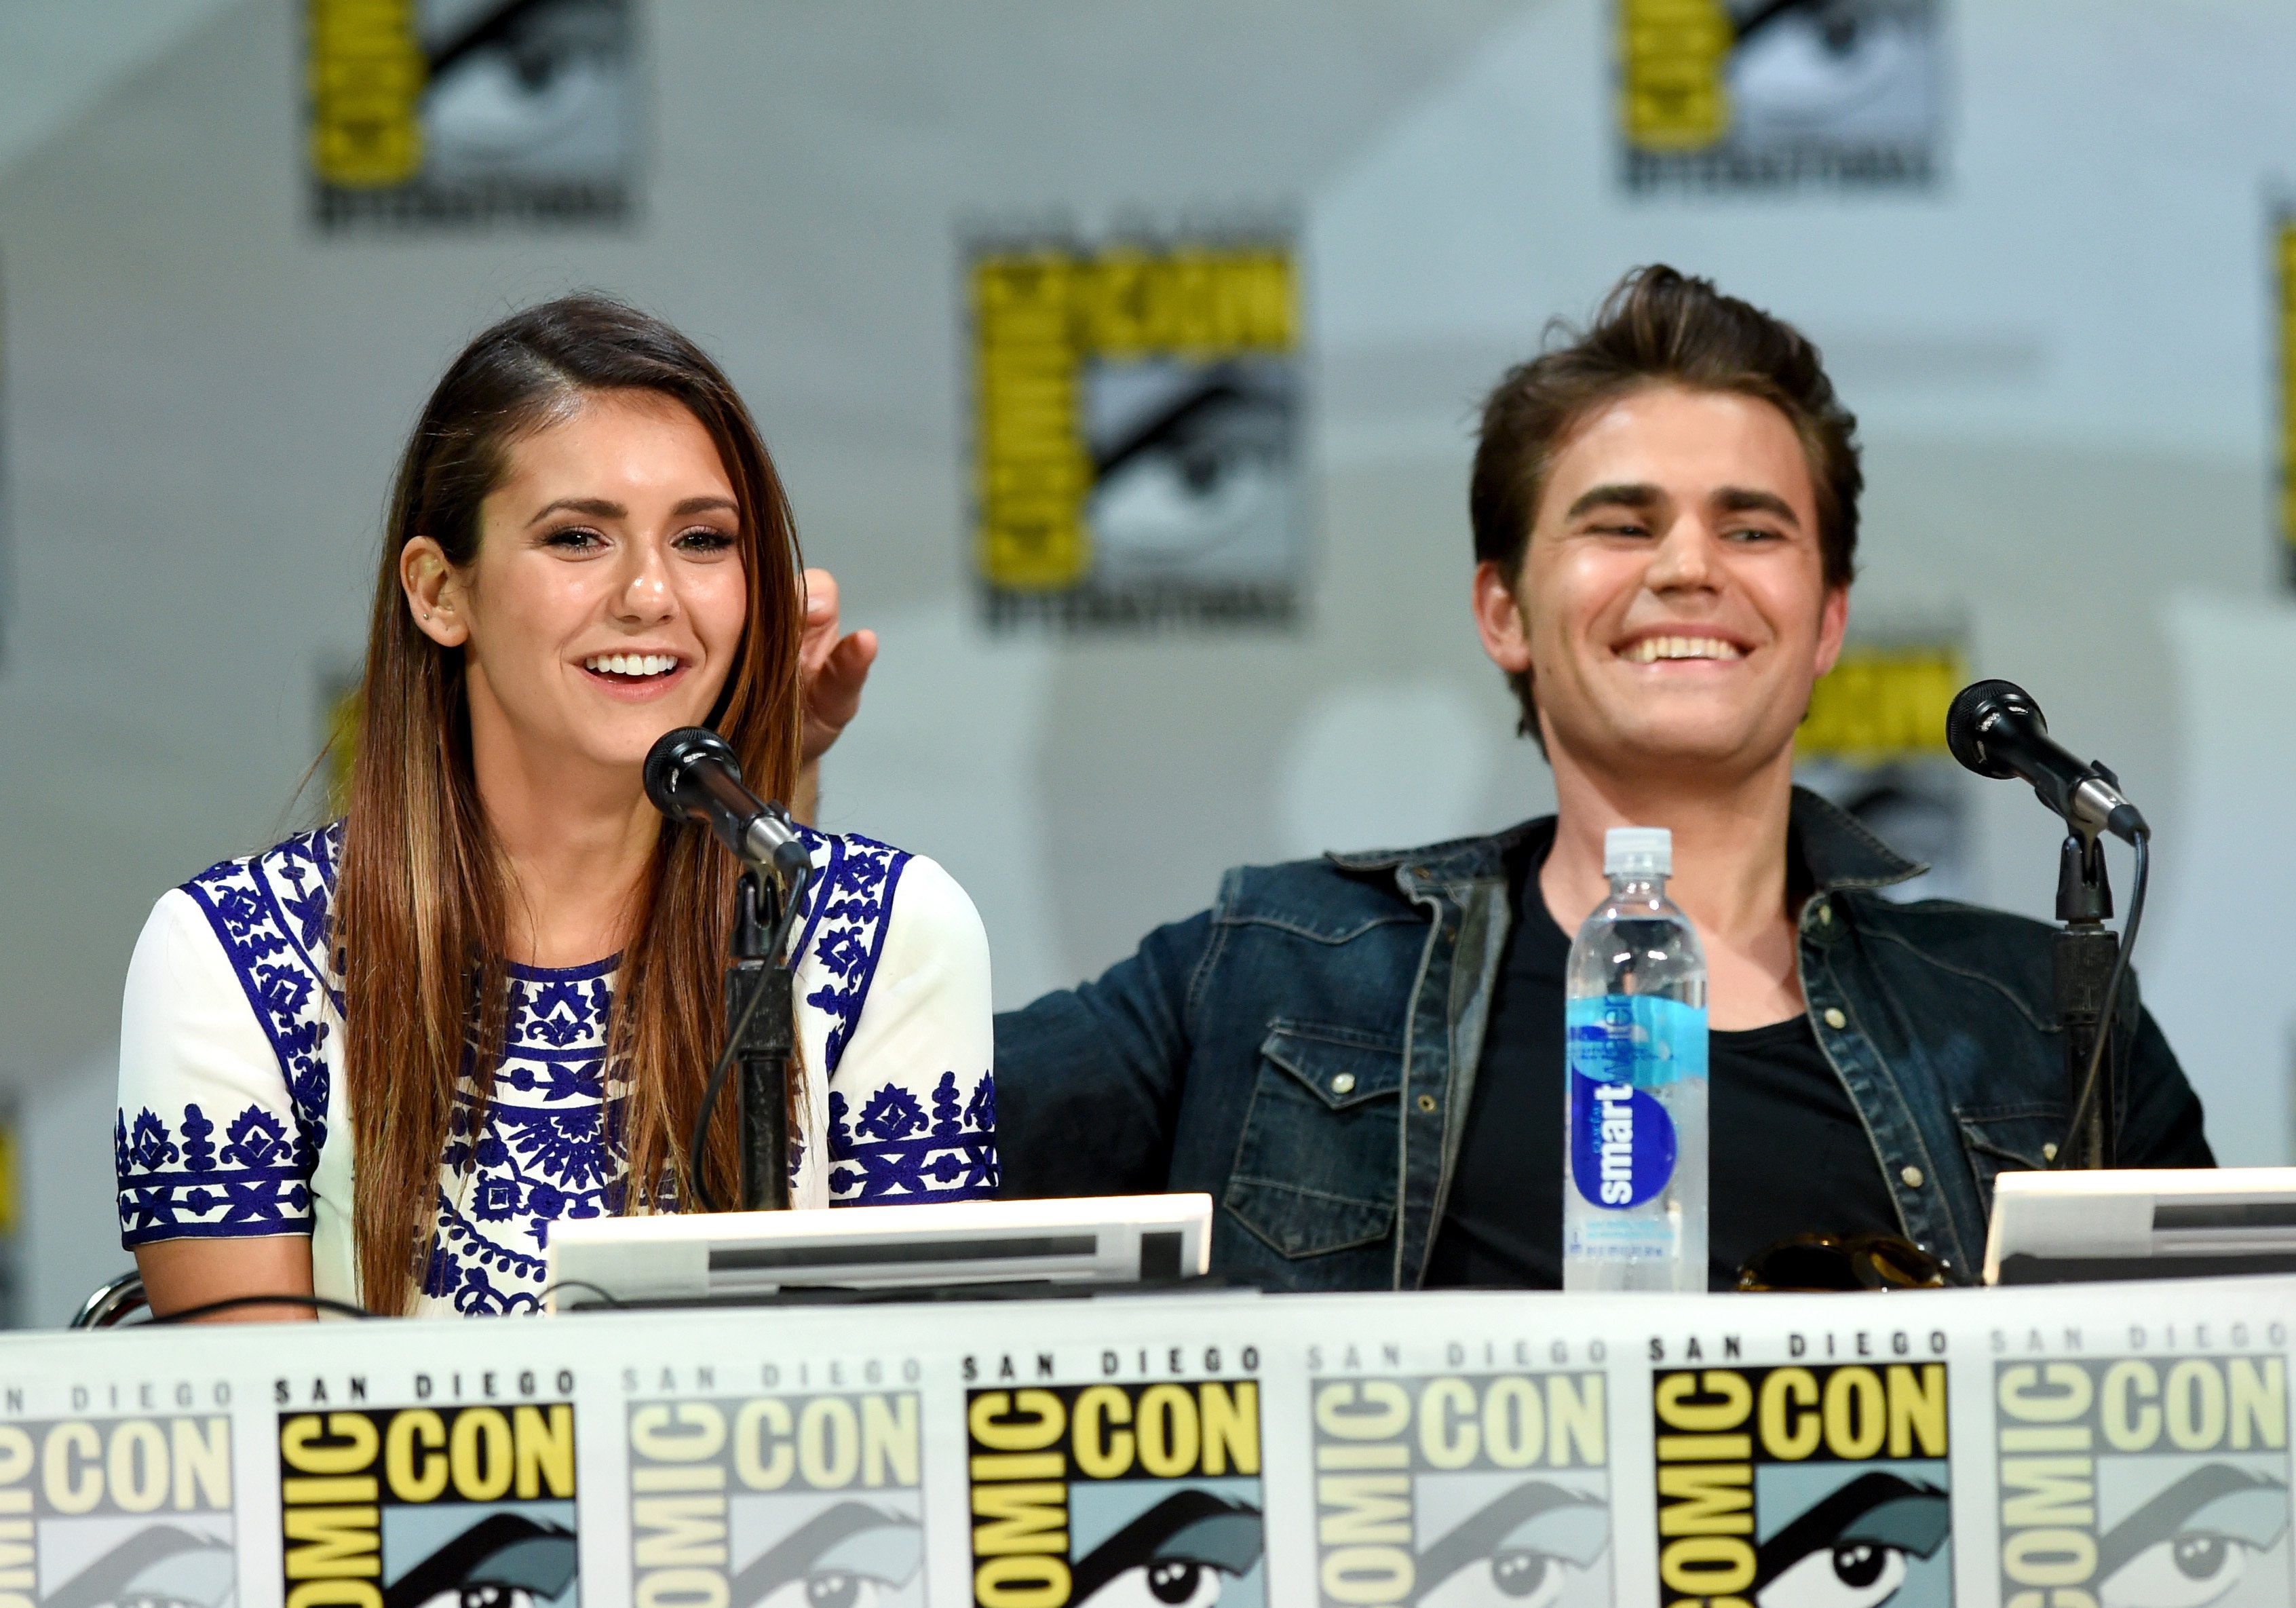 Nina Dobrev and Paul Wesley, whose show 'The Vampire Diaries' is leaving Netflix in September 2022, appear onstage at a San Diego Comic-Con panel. Dobrev wears a white and blue dress. Wesley wears a jean jacket over a black shirt.